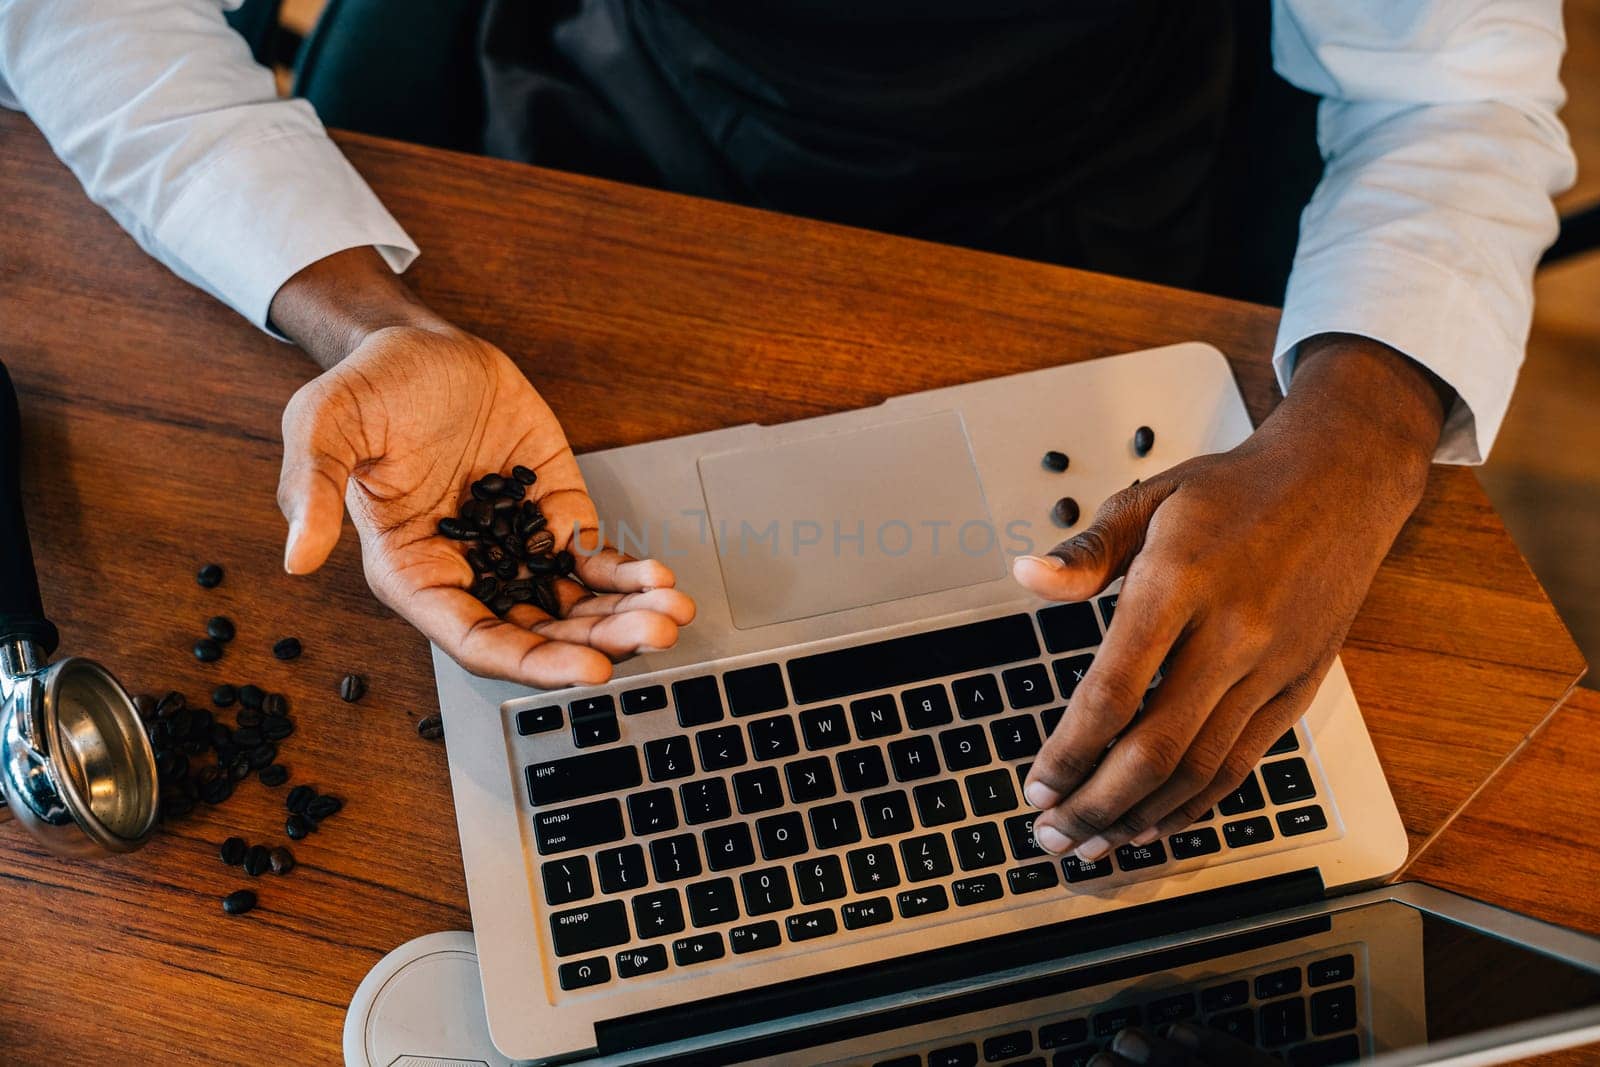 In a clean modern roastery office a barista and owner uses a laptop to inspect coffee beans. Employing technology ensuring quality beans. Entrepreneur precise check guarantees excellence.